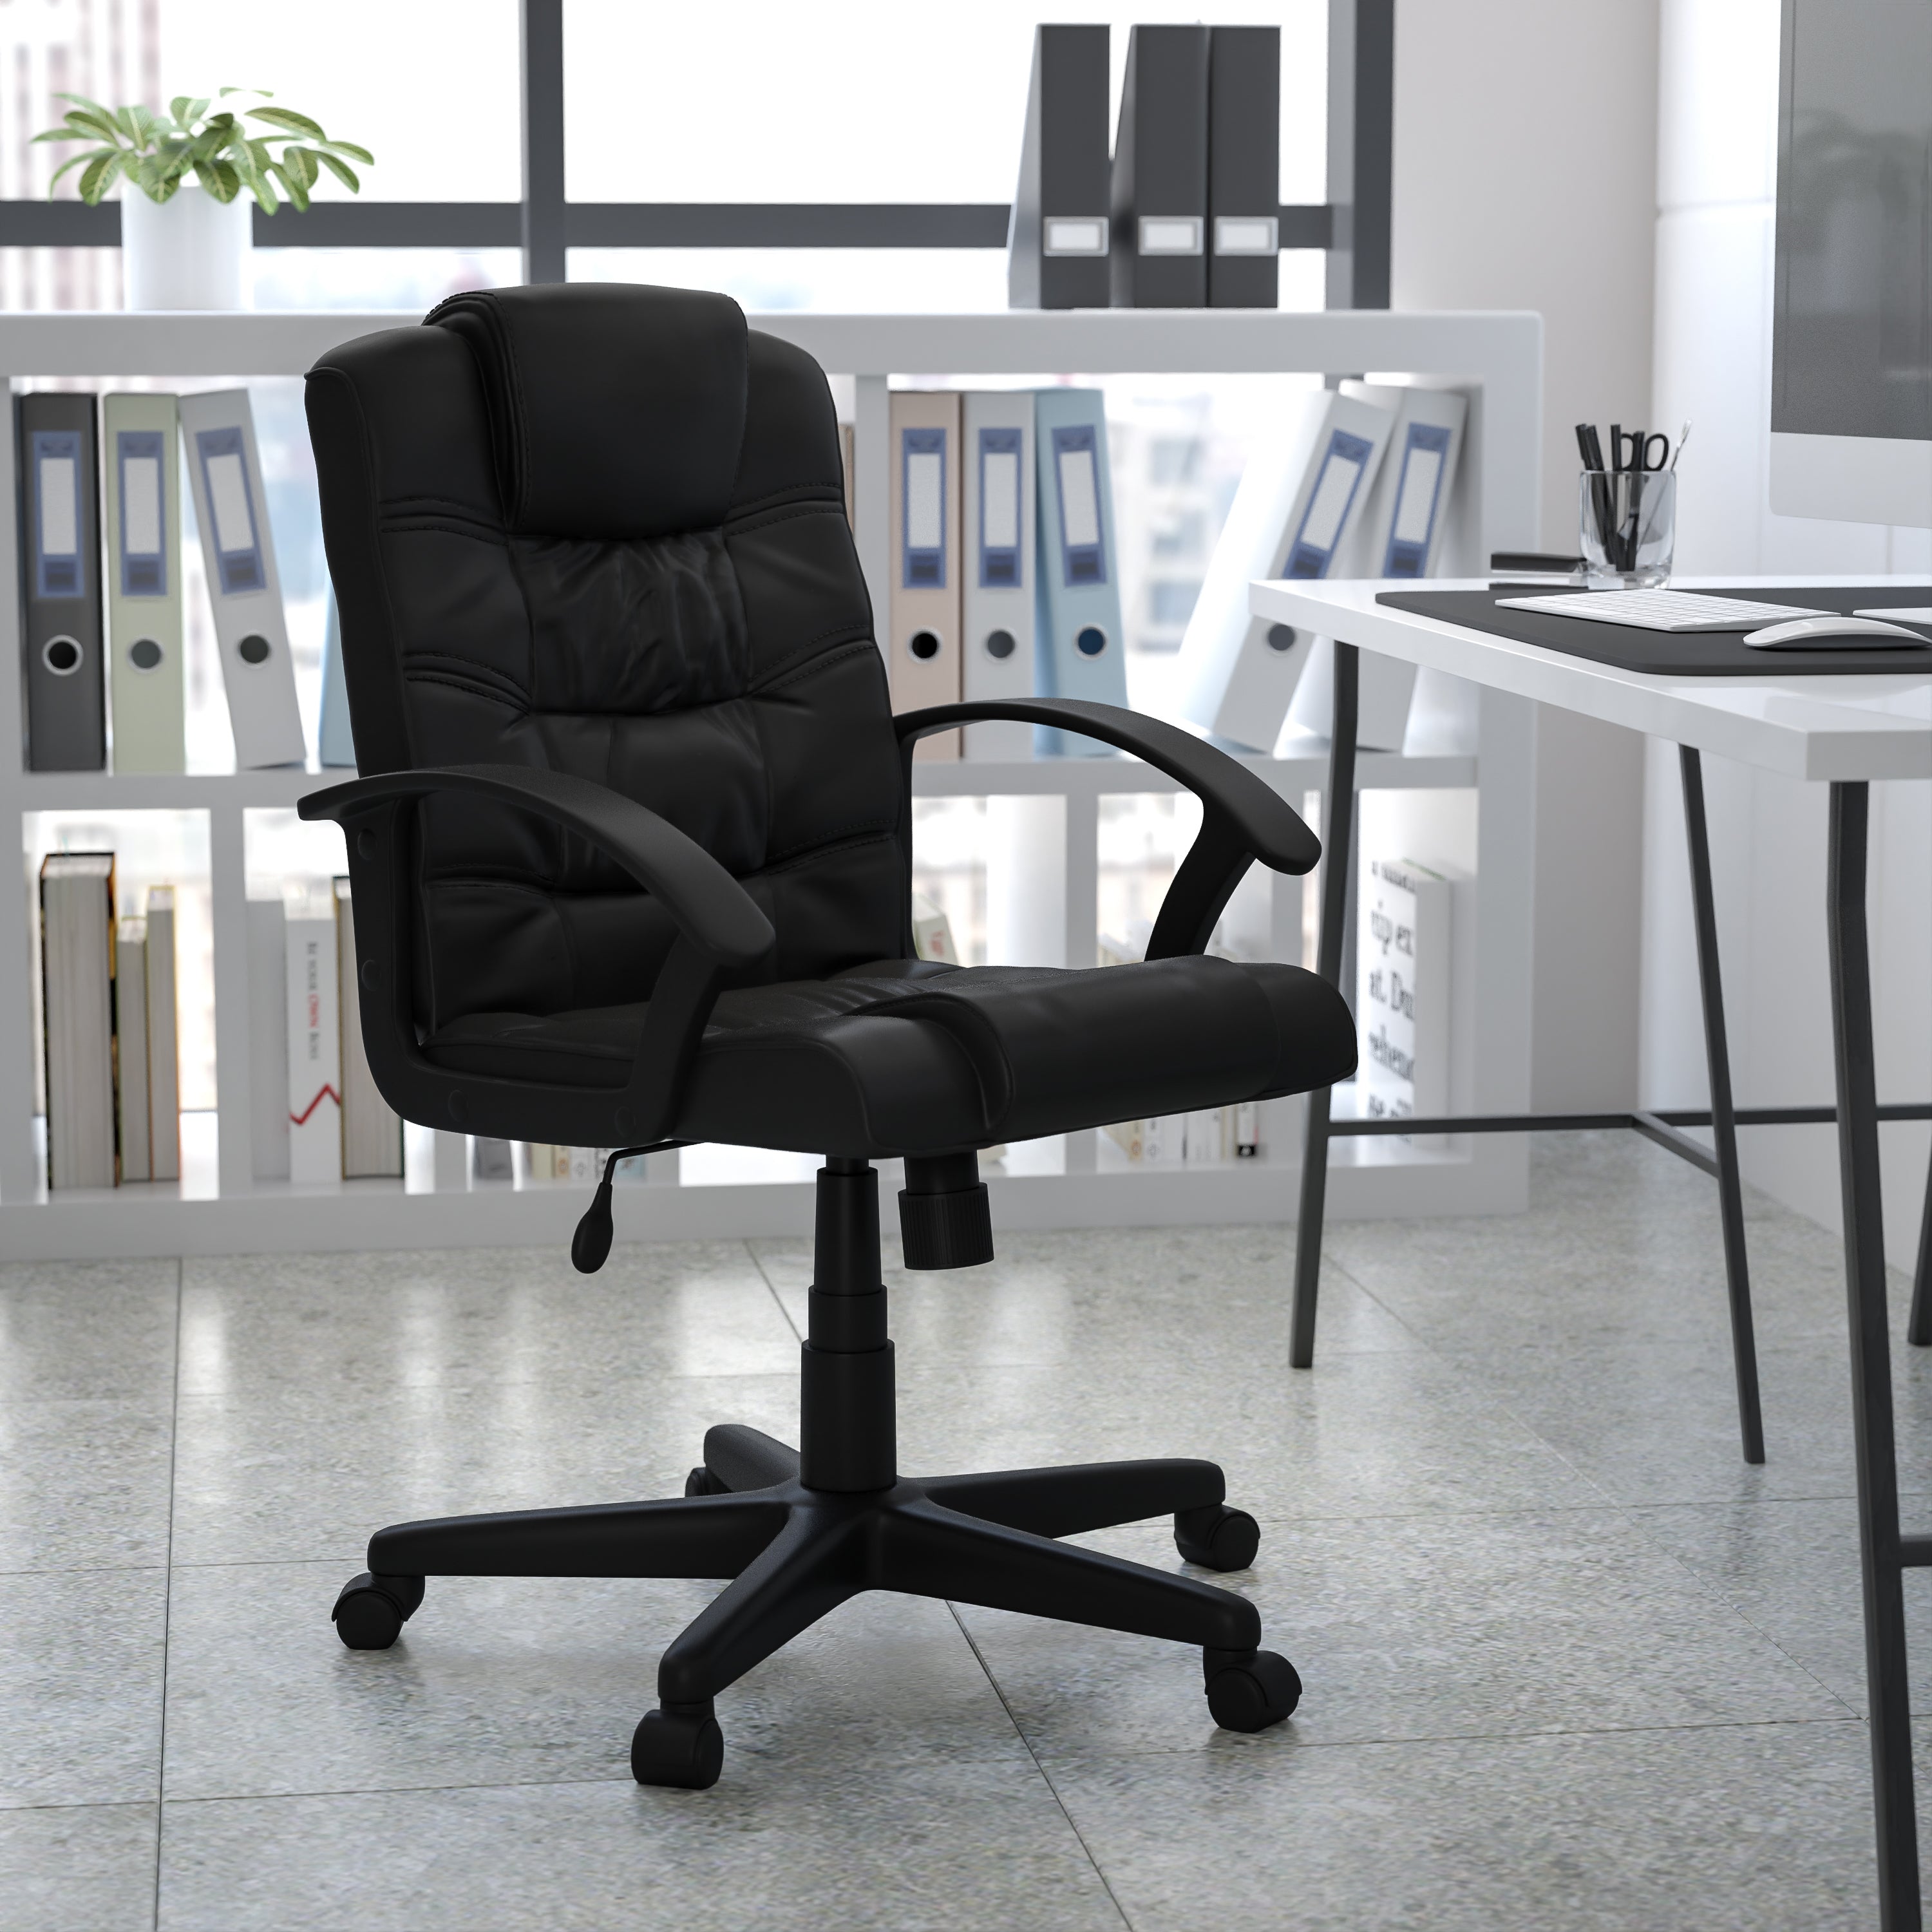 Mid-Back LeatherSoft Ripple and Accent Stitch Upholstered Swivel Task Office Chair with Arms-Office Chair-Flash Furniture-Wall2Wall Furnishings